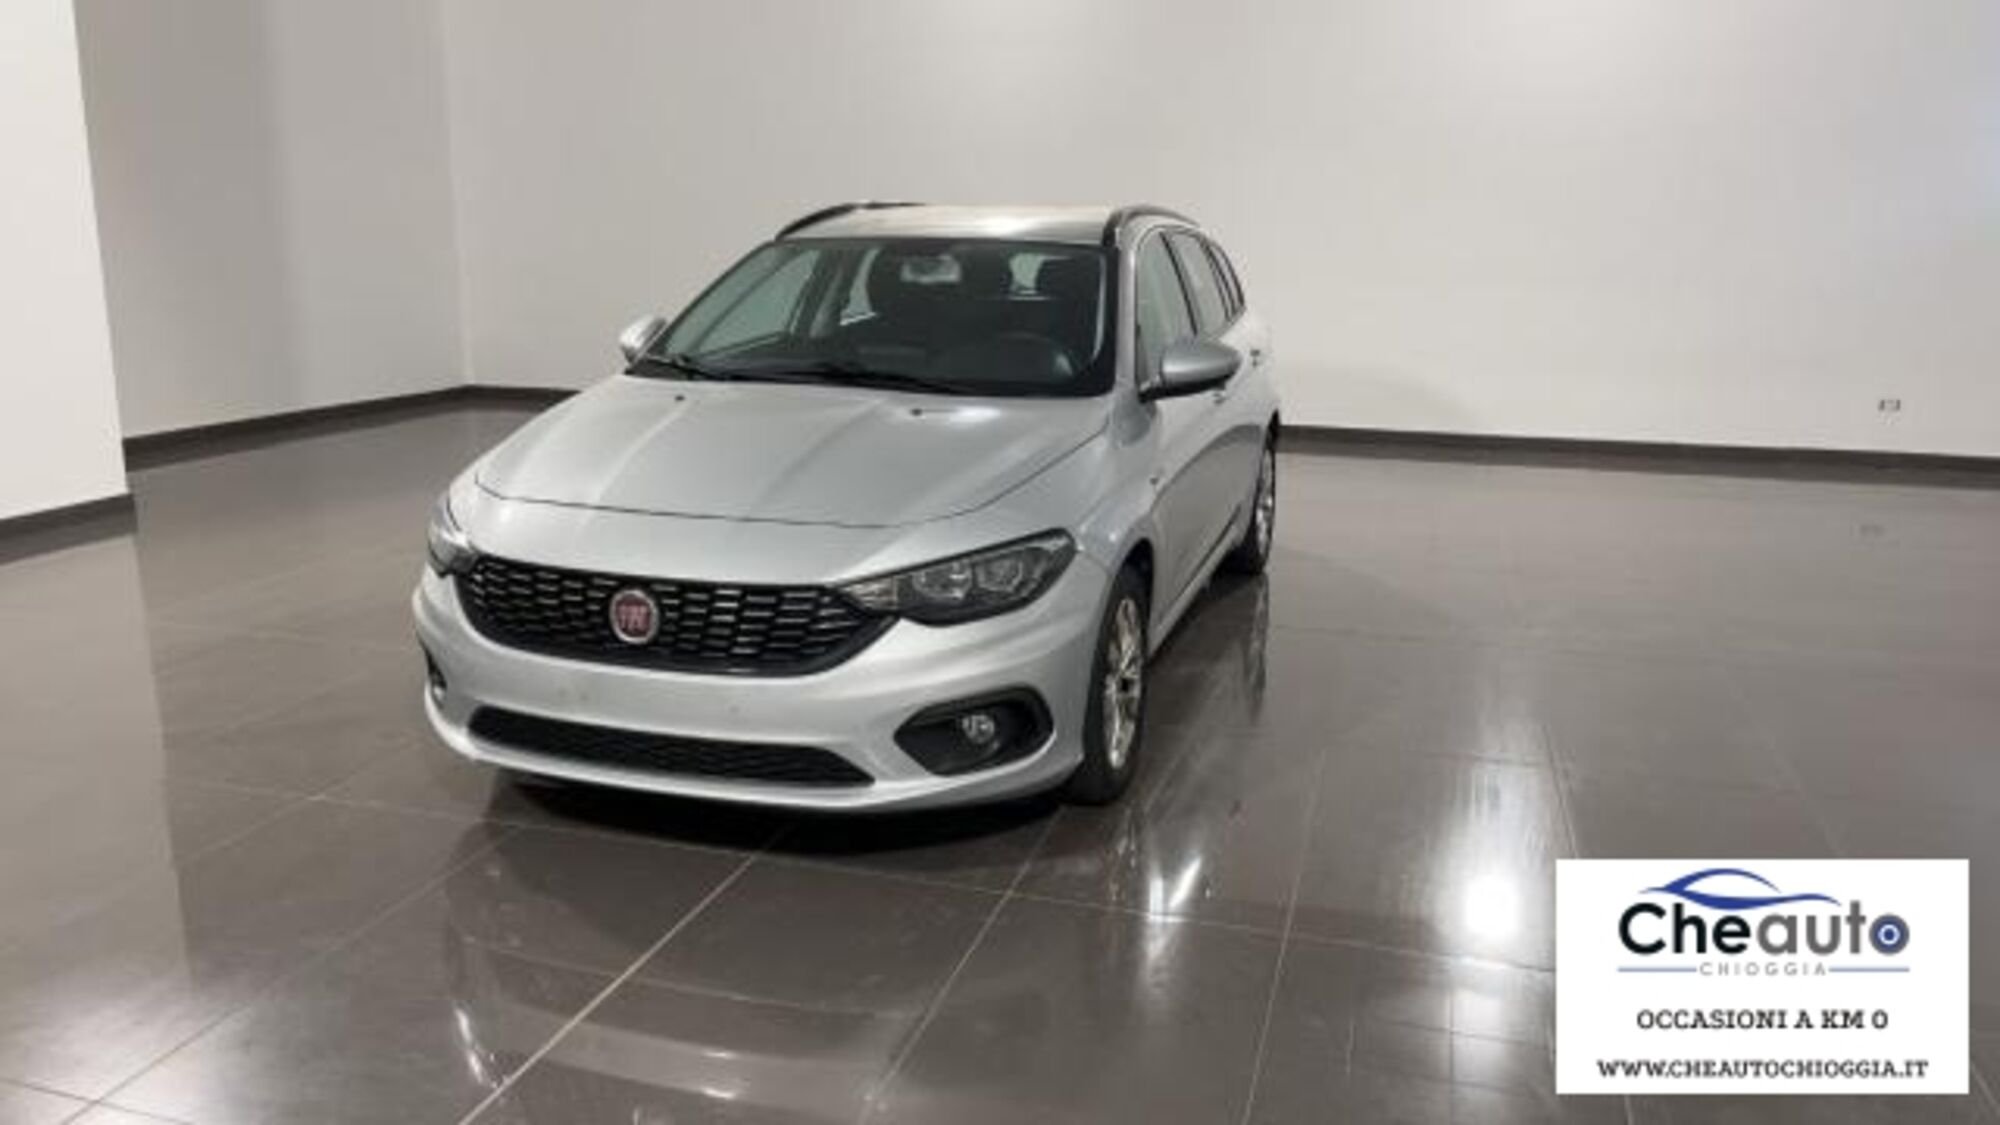 Fiat Tipo Station Wagon Tipo 1.3 Mjt S&S SW Lounge 